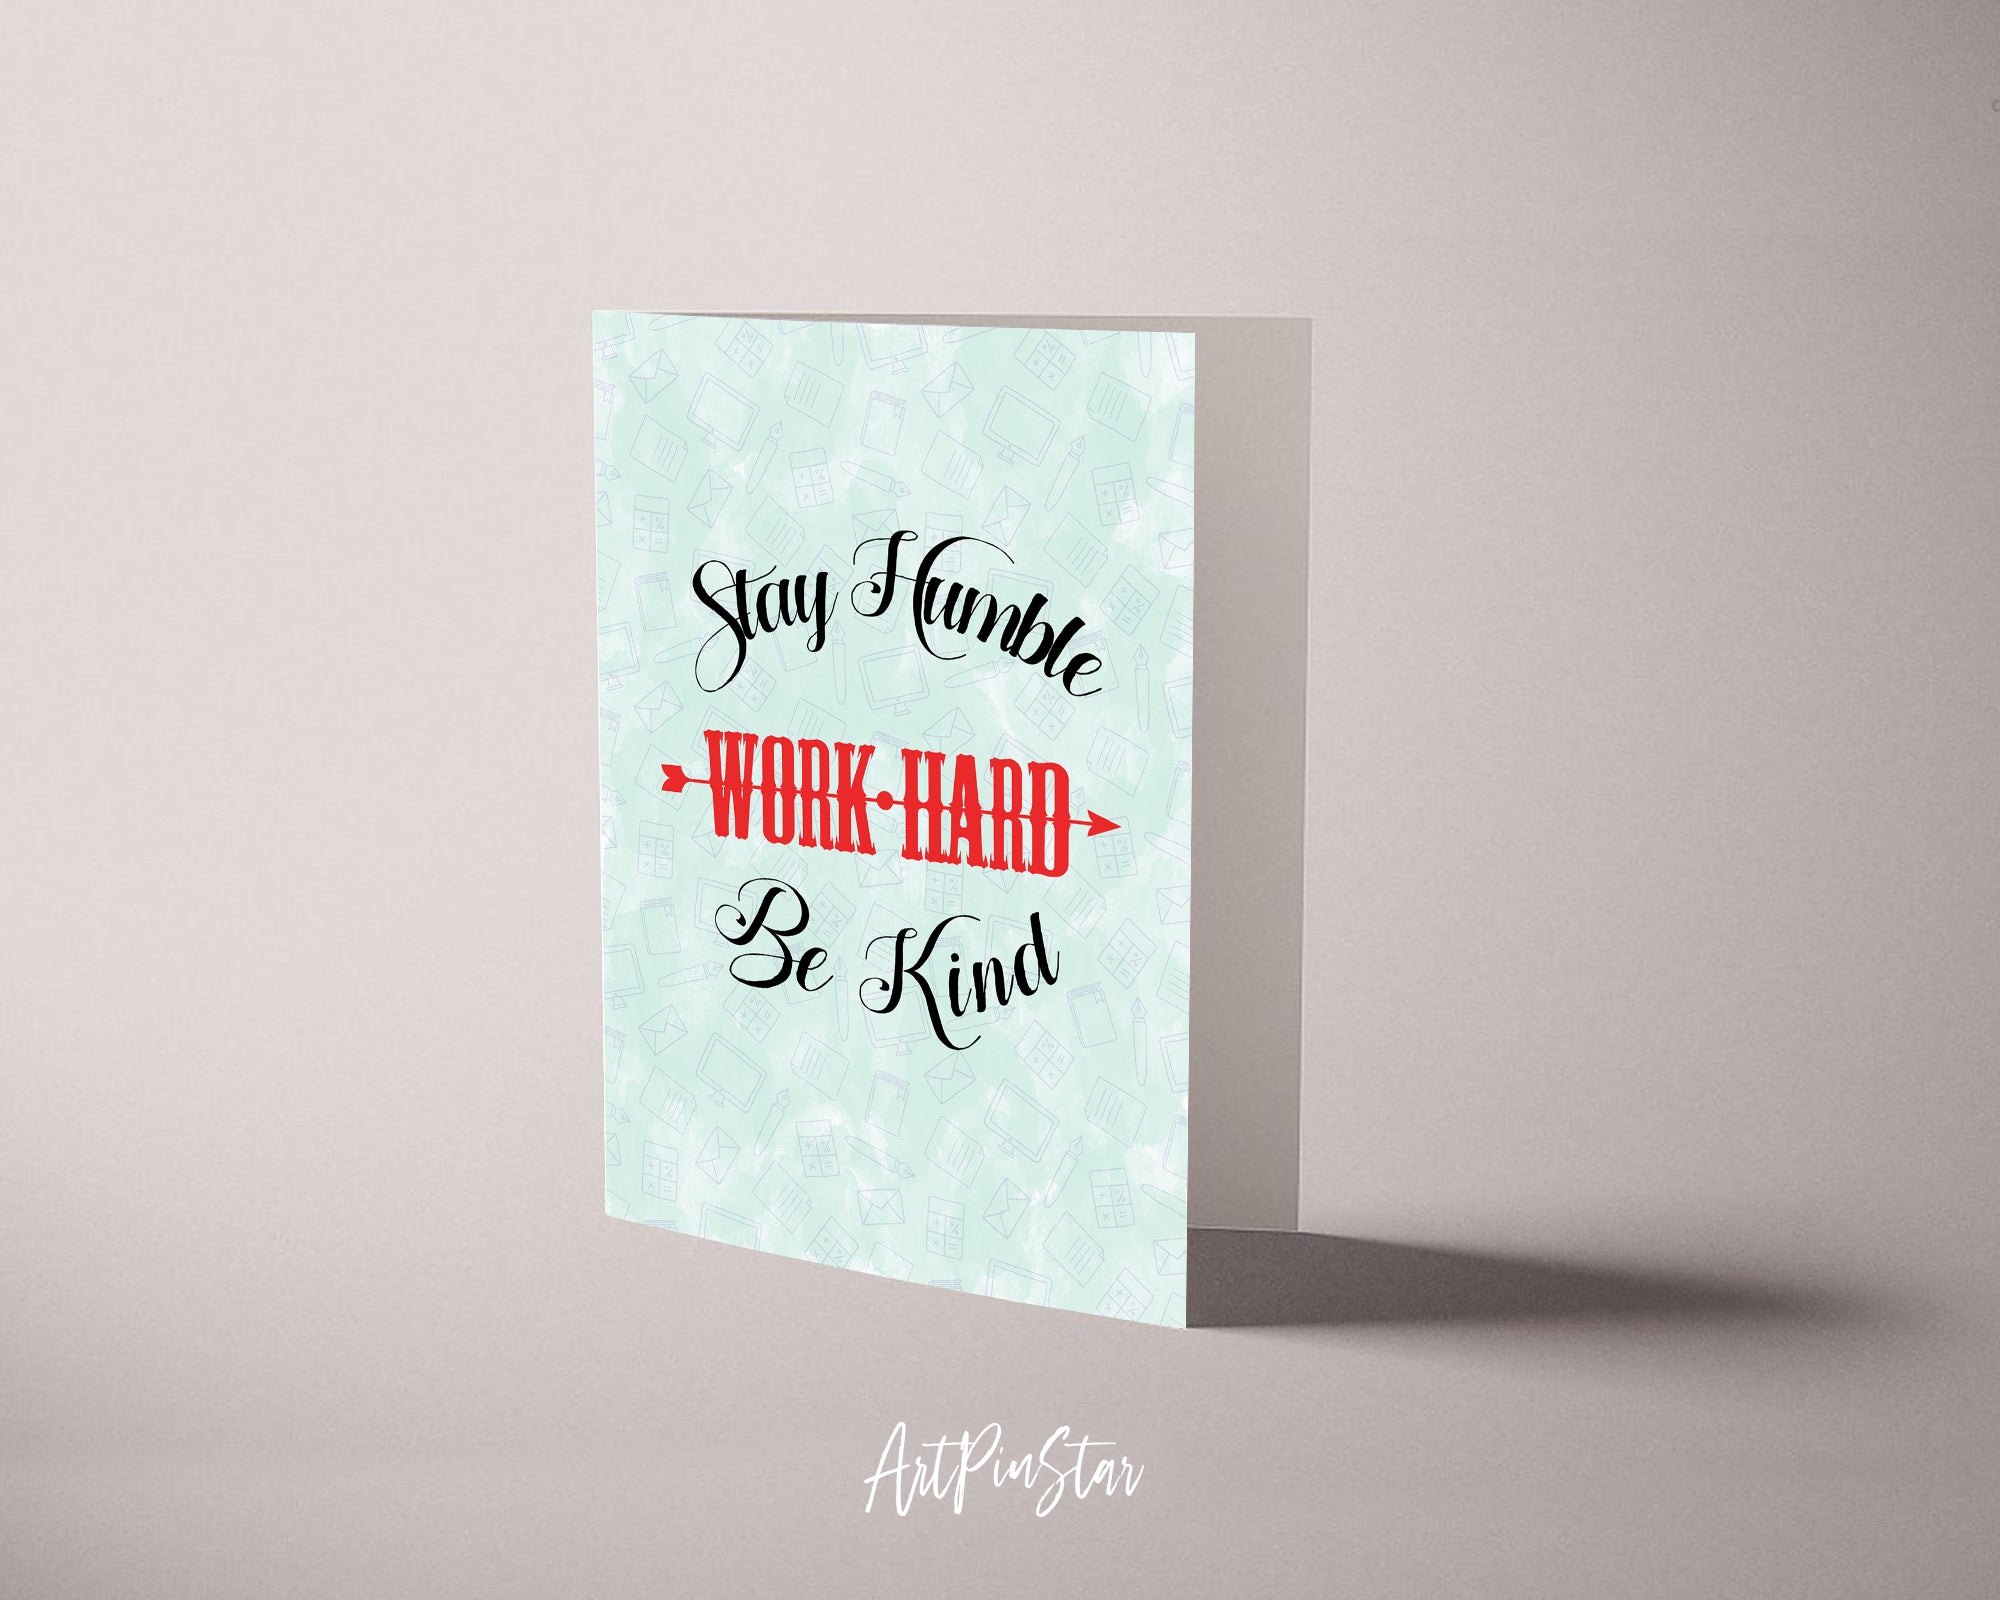 Stay humble work hard be kind Inspirational Quote Customized Greeting Cards